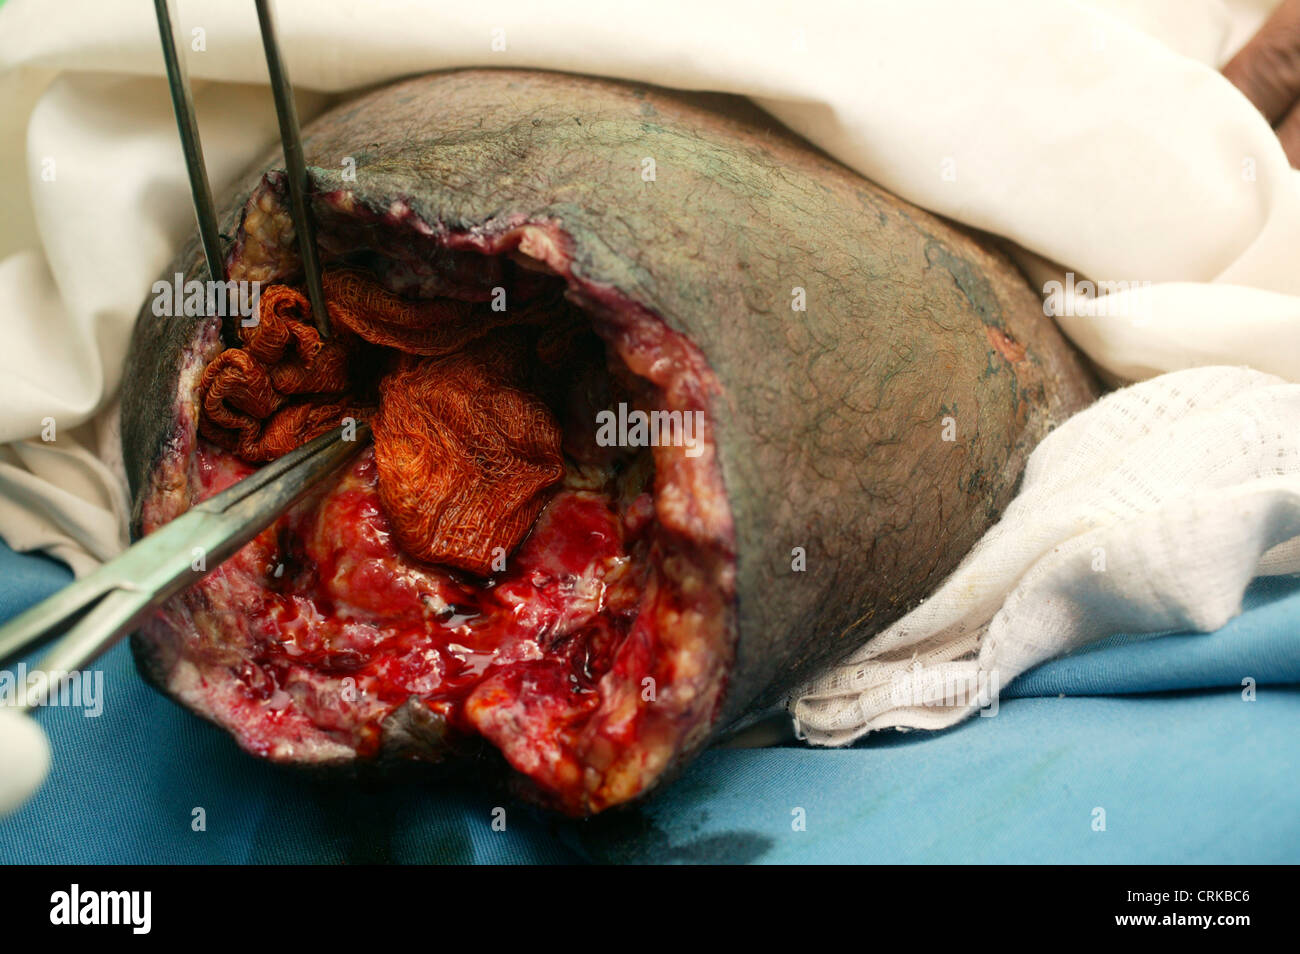 A 52 year old male has the wound of his amputated right lower limb redressed. He lost his leg due to previous ischemia. The open wound is cleaned before being dressed to prevent further infection. Stock Photo